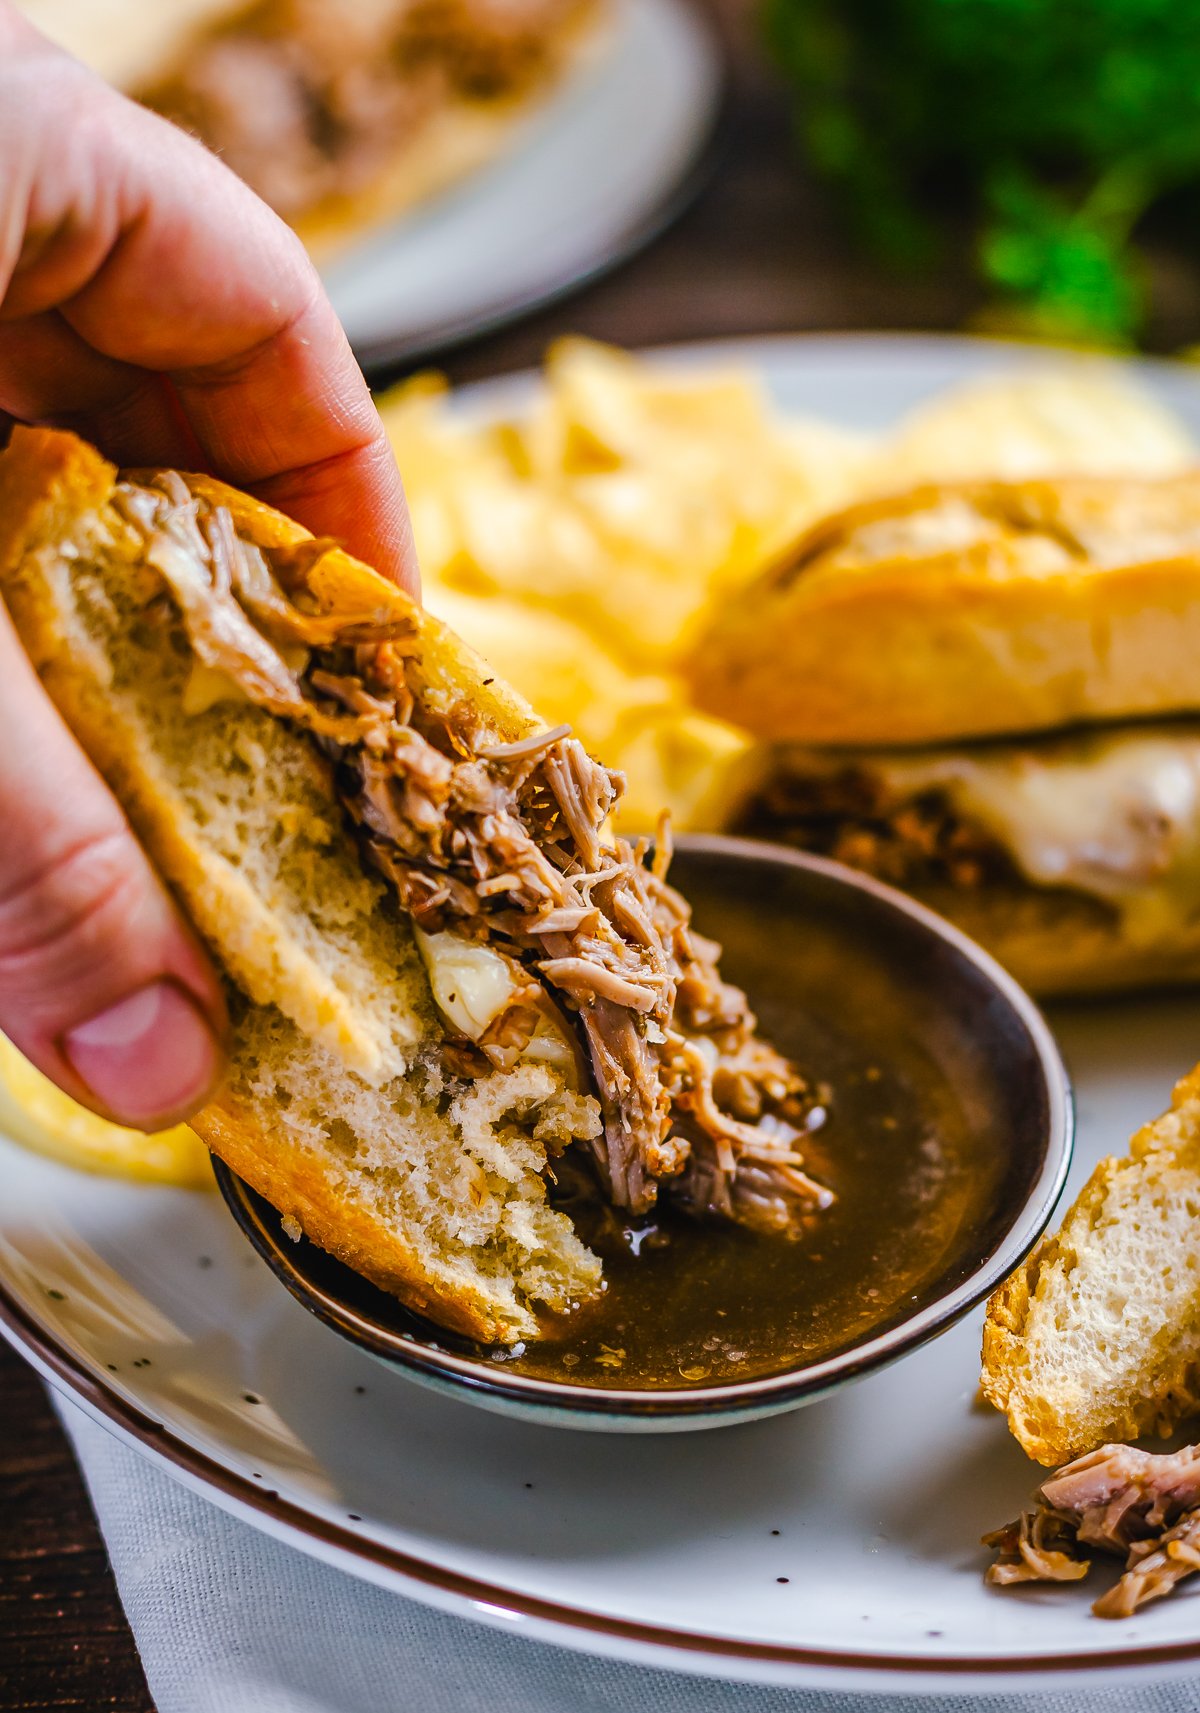 Sandwich being dipped into au jus.